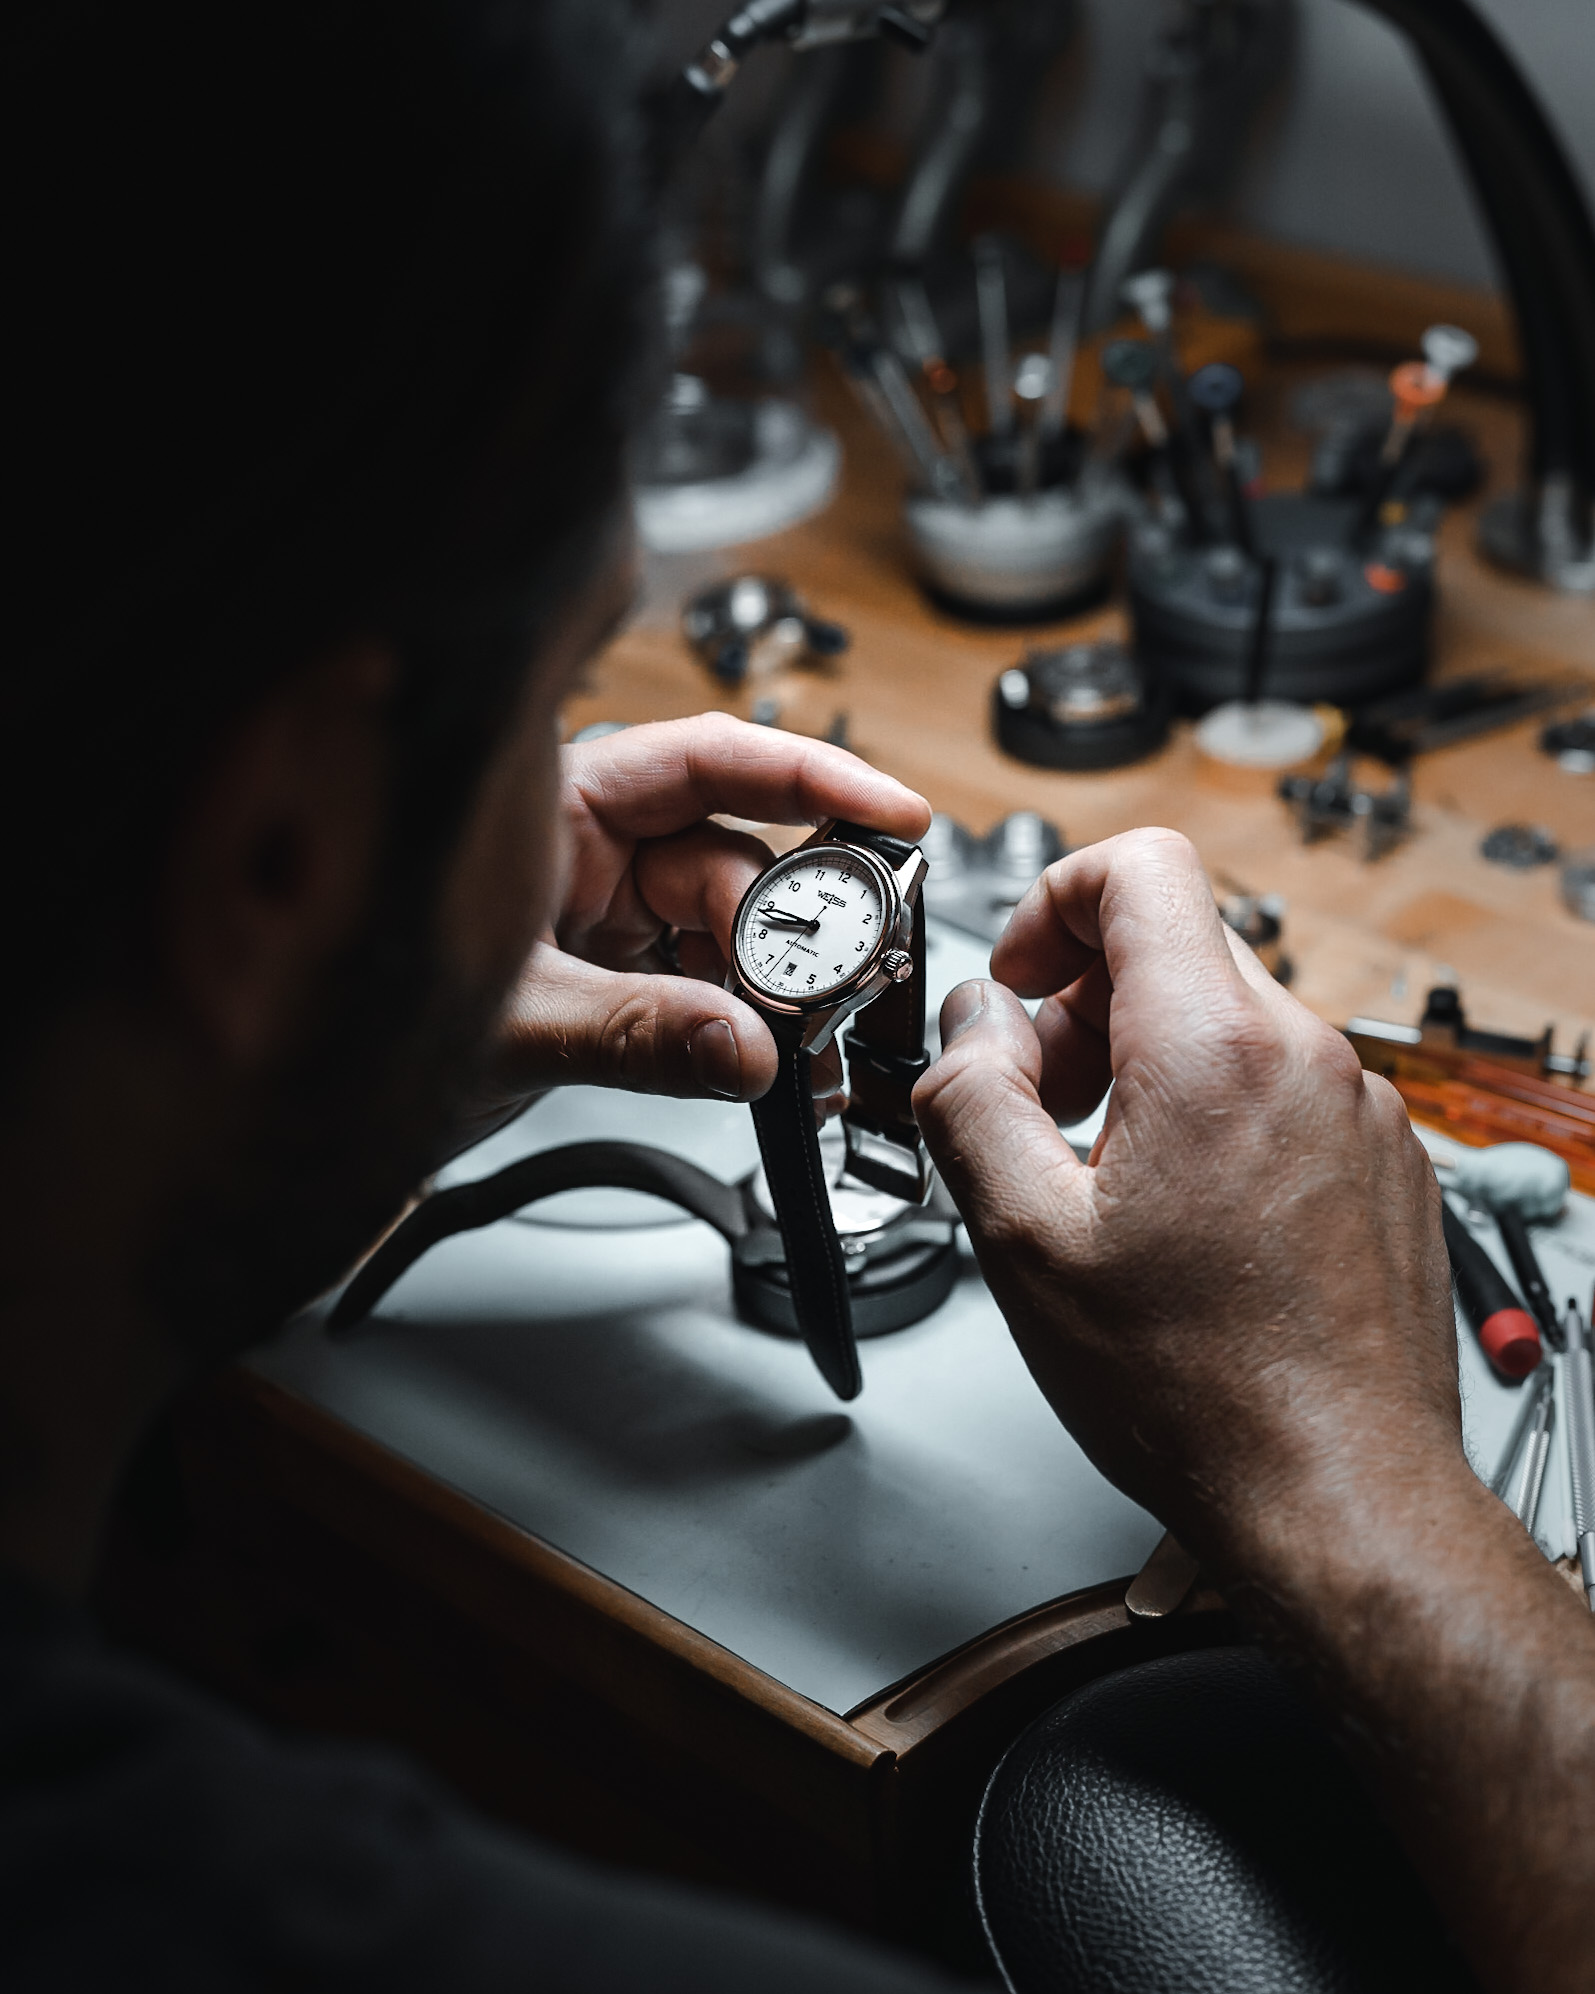 Cameron Weiss examines one of the heirloom-quality watches his company produces.